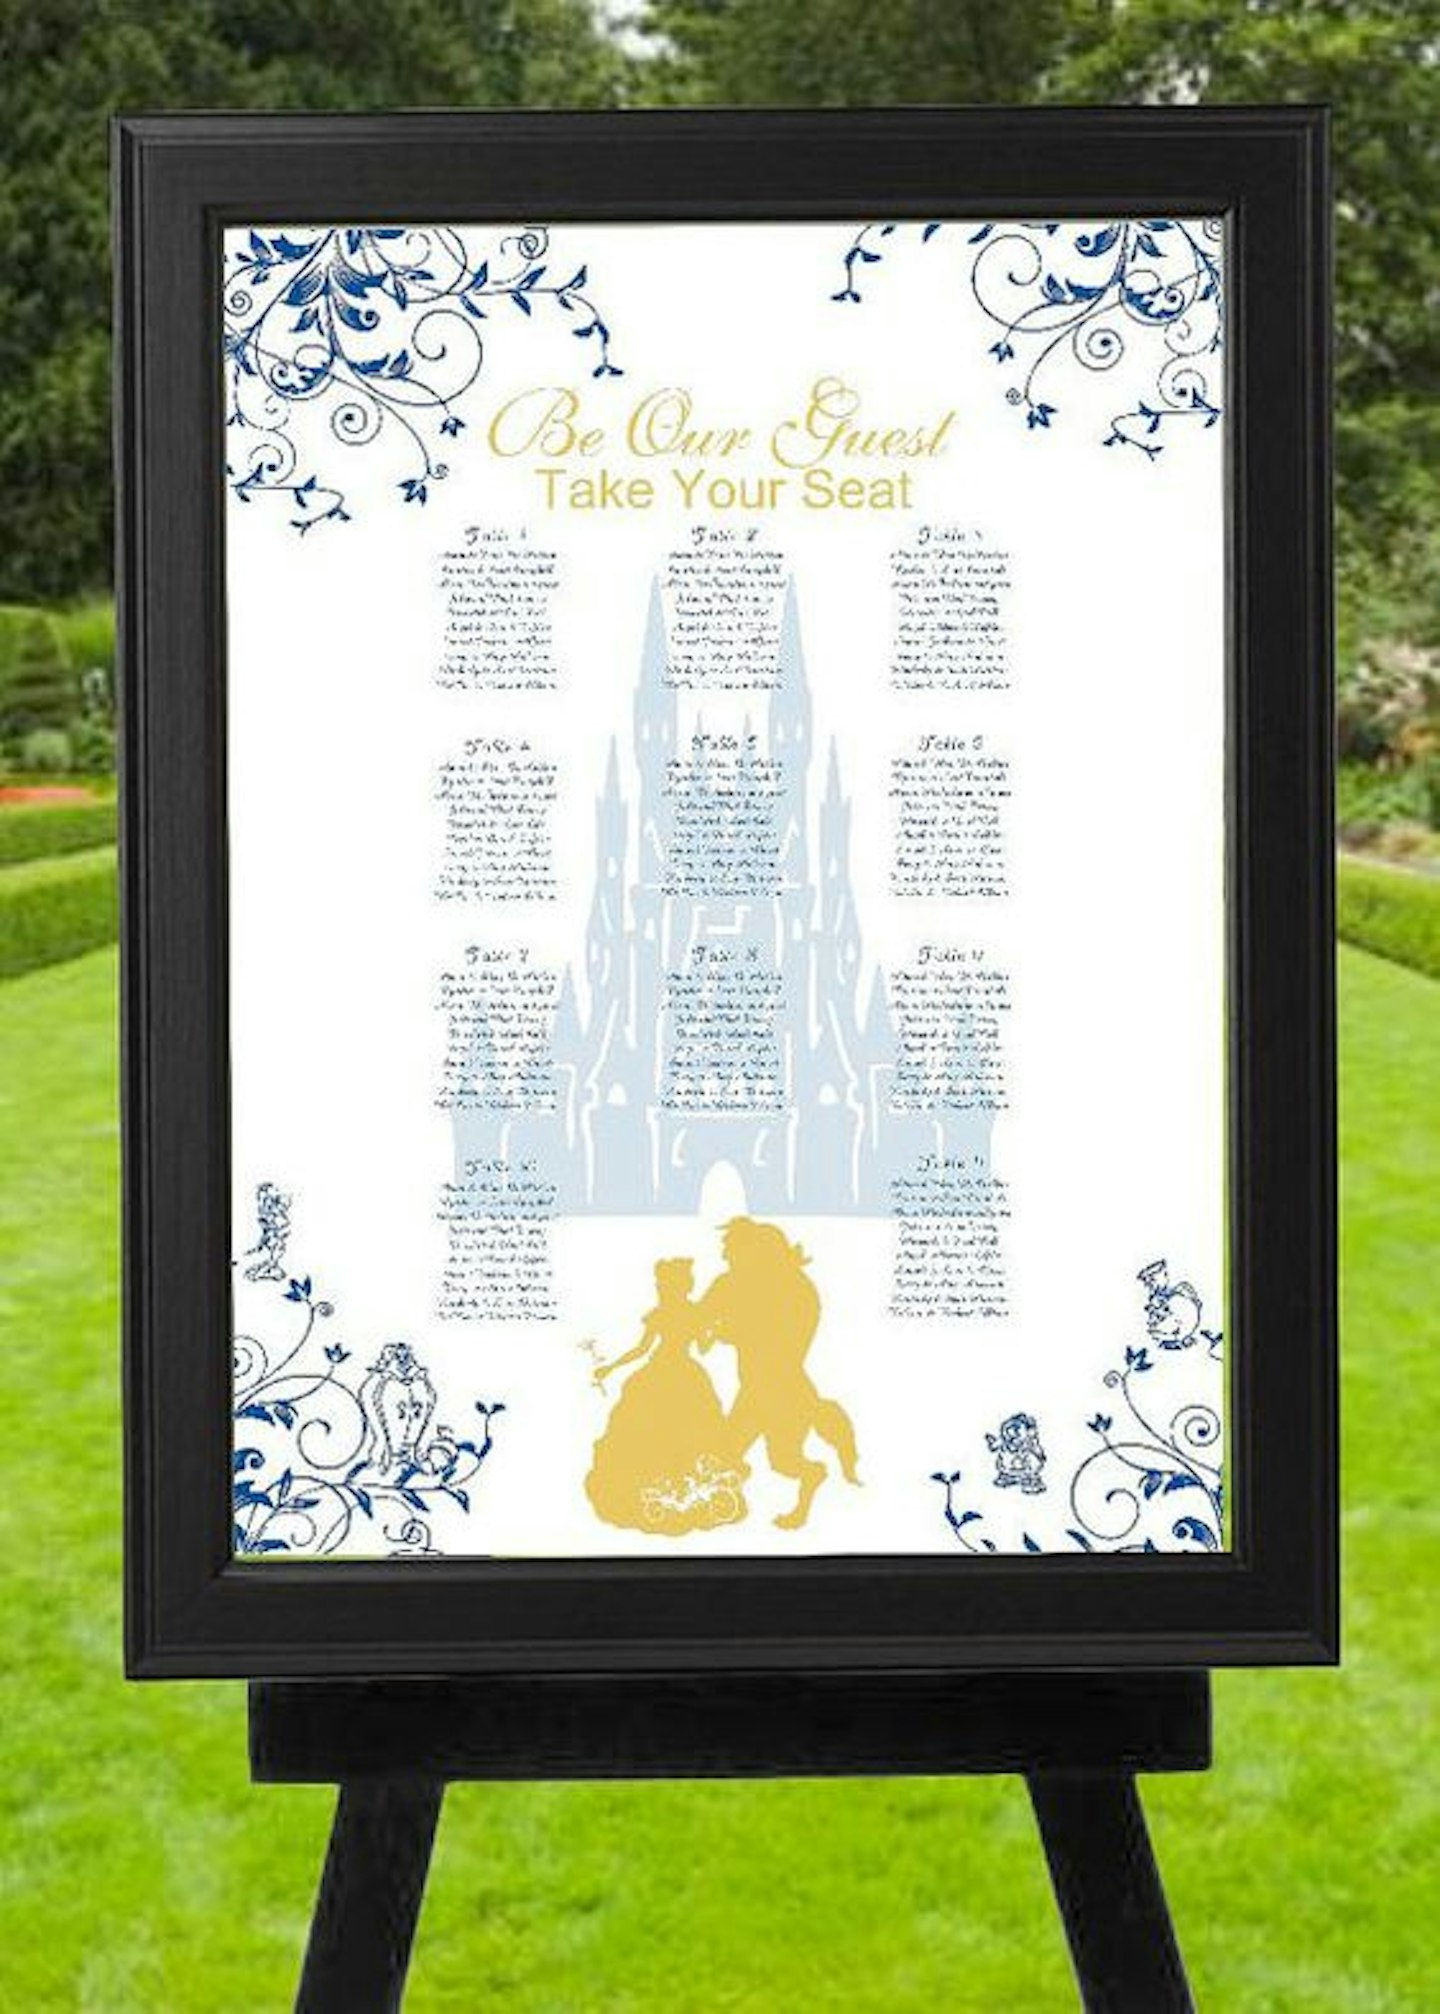 Beauty and the Beast wedding